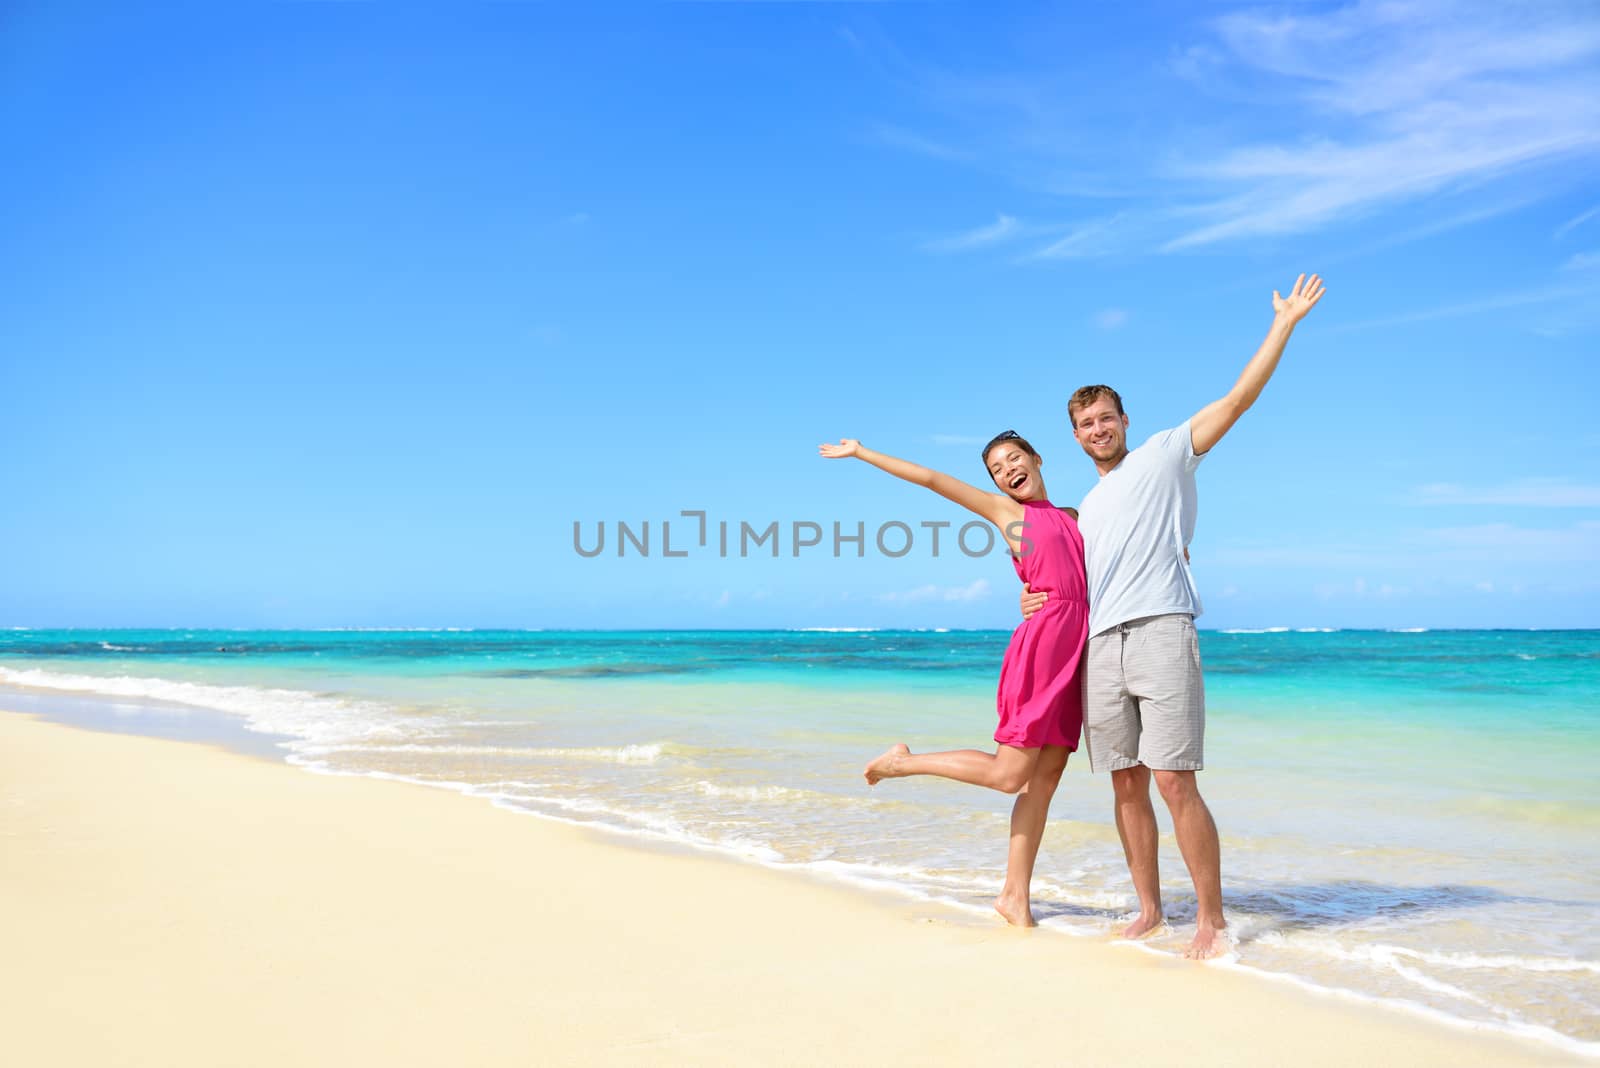 Freedom on beach vacation - happy carefree winning couple with arms up showing happiness and fun on paradise beach with perfect pristine turquoise water in sunny tropical getaway